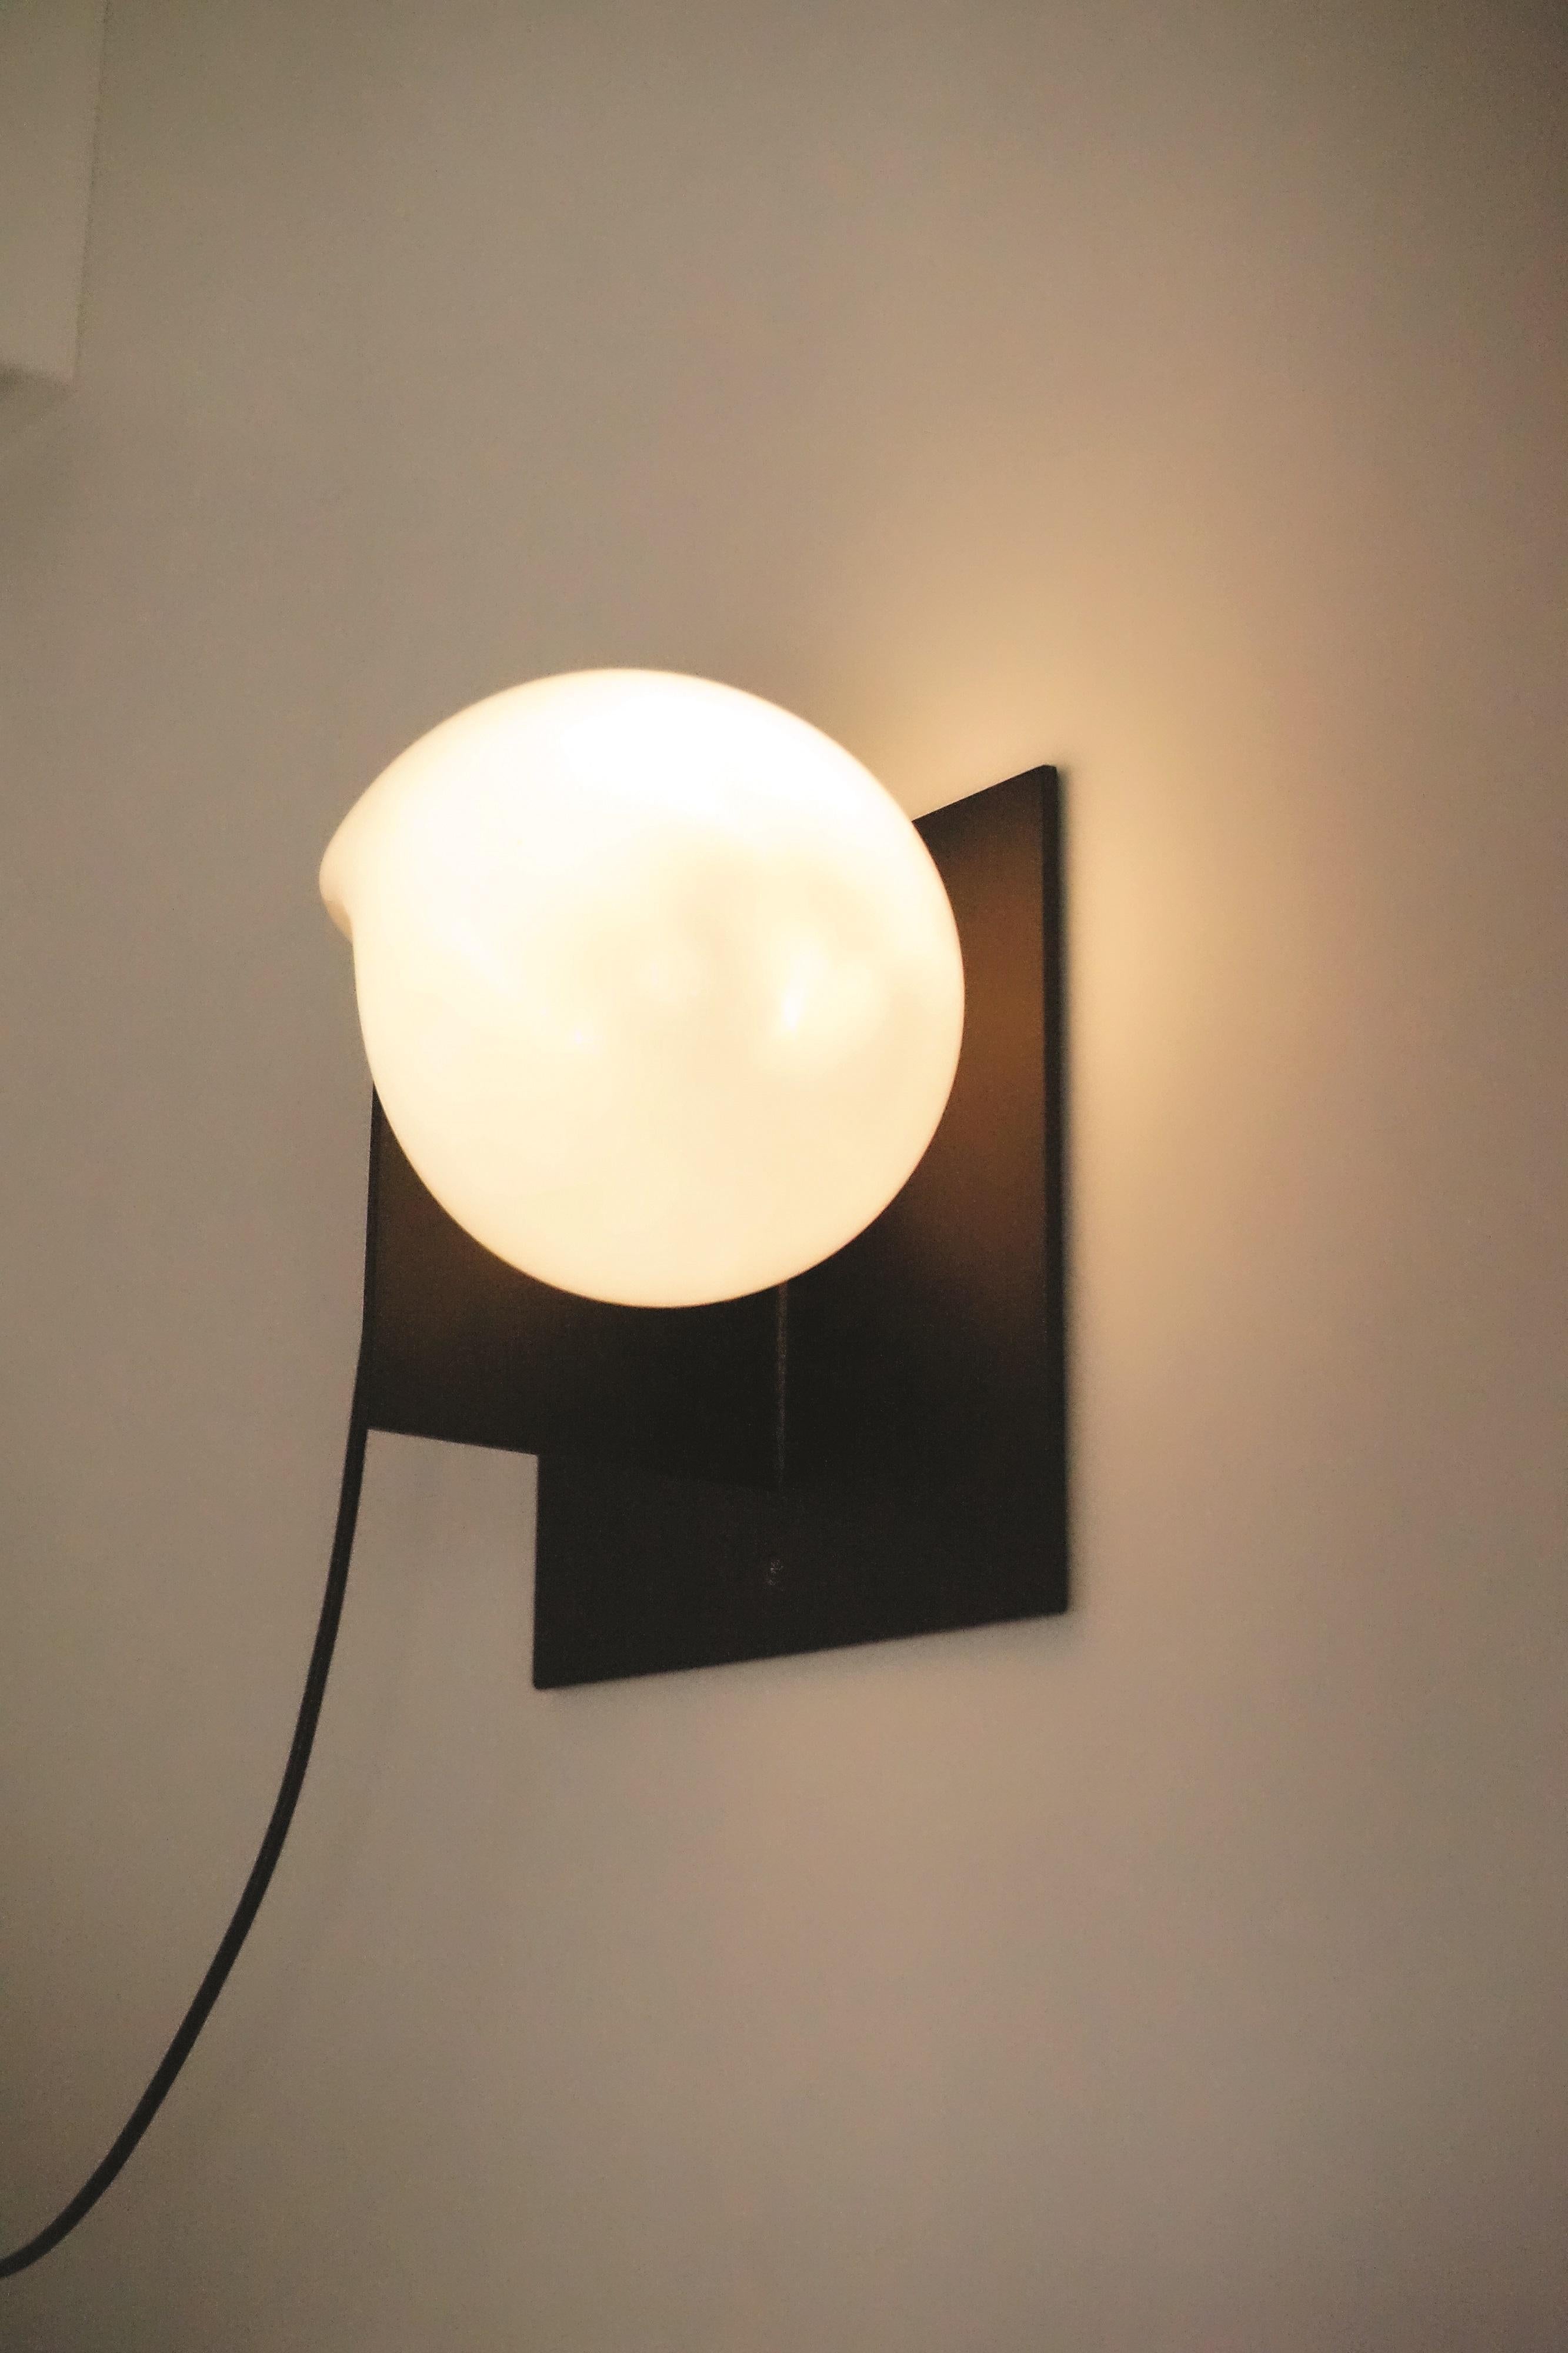 Black bloop sconce by Nick Pourfard.
Dimensions: D 15.5 x W 25.5 x H 25.5 cm.
Materials: metal, glass.
Different finishes available. 

All our lamps can be wired according to each country. If sold to the USA it will be wired for the USA for